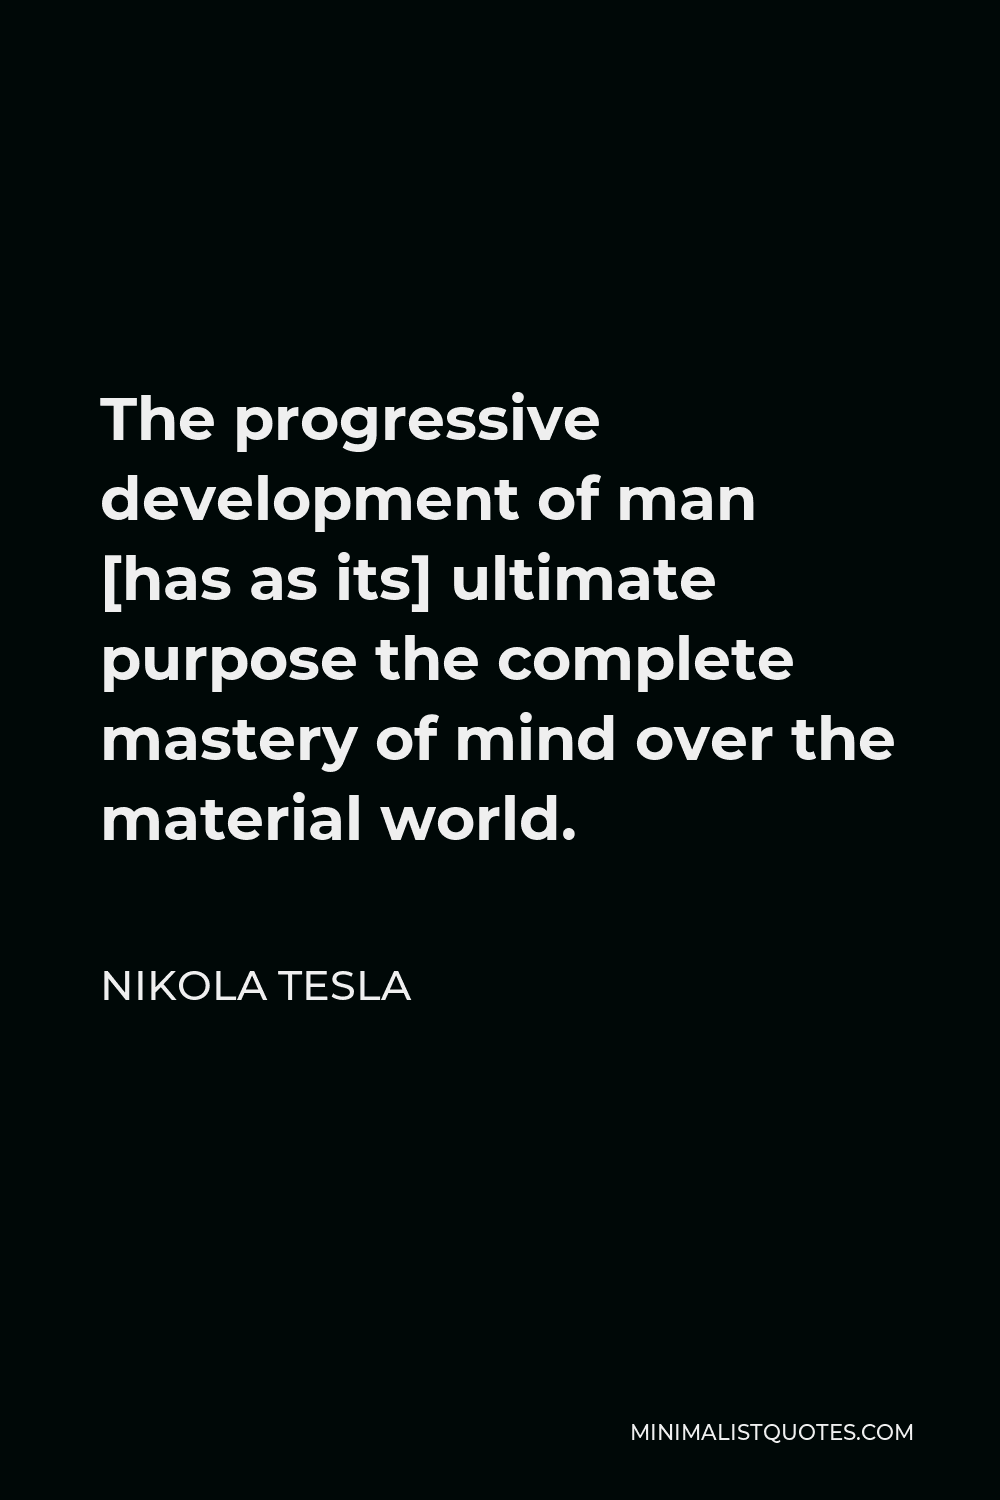 Nikola Tesla Quote - The progressive development of man [has as its] ultimate purpose the complete mastery of mind over the material world.